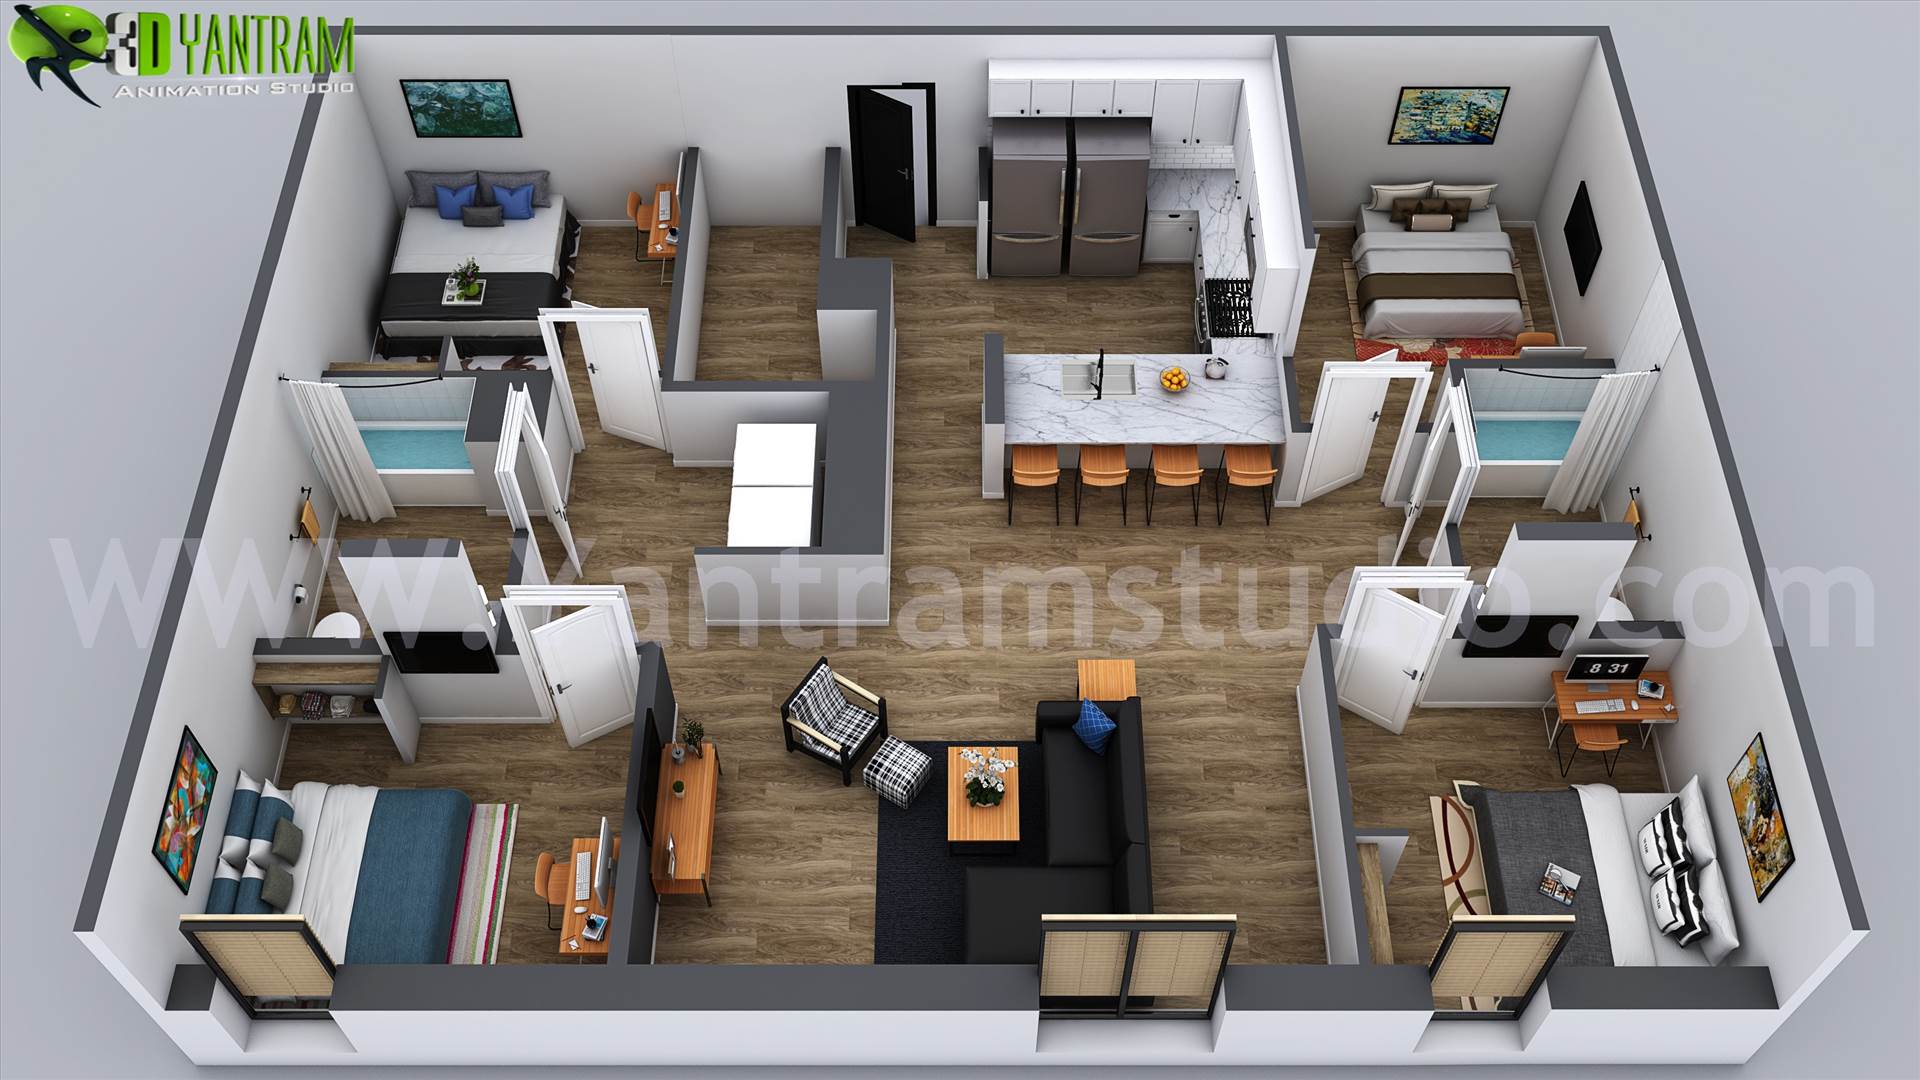 3D Home Floor Plan Designs By Yantram floor plan designer - Washington, USA - Floor plans are usually drawn to show exact property area and room types. some are come along with appliances and furniture for the better idea about placement and space utilization.
Read MOre -- https://goo.gl/6fYD3K
#Modern #3D #floorplan #design #ide by Yantramarchitecturaldesignstudio